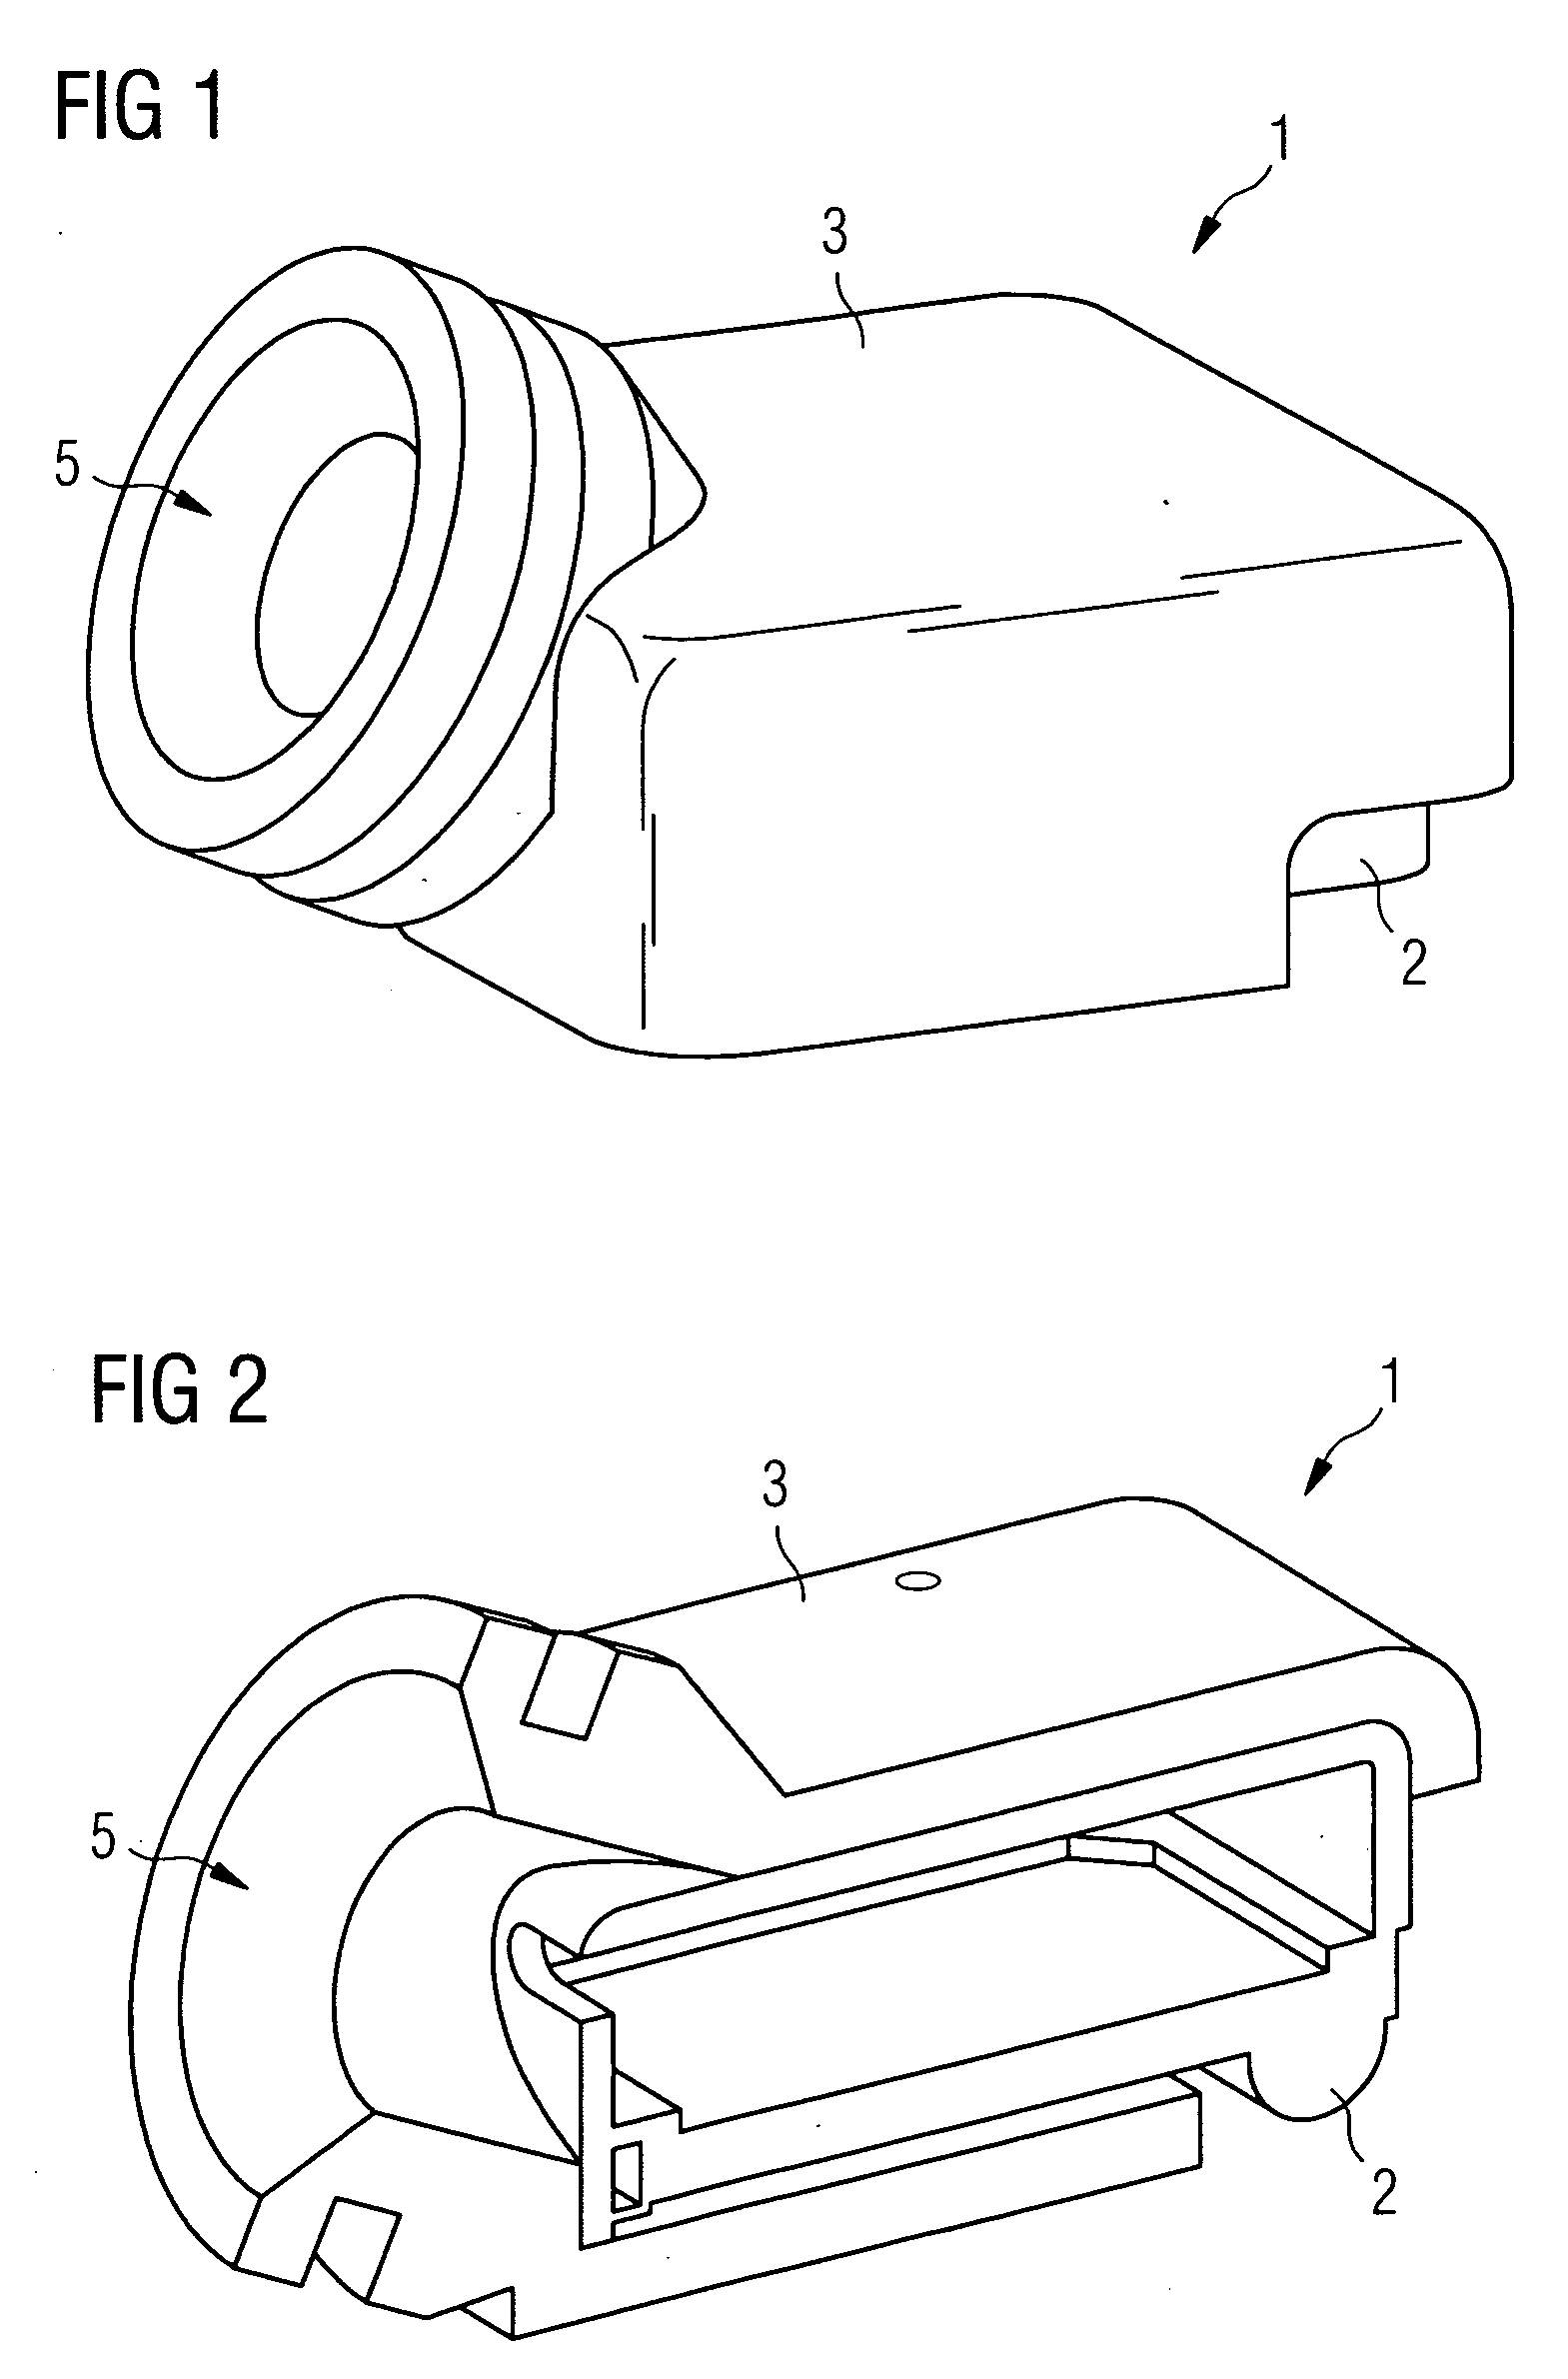 Electroacoustic miniature converter with retaining means for installation in a hearing device